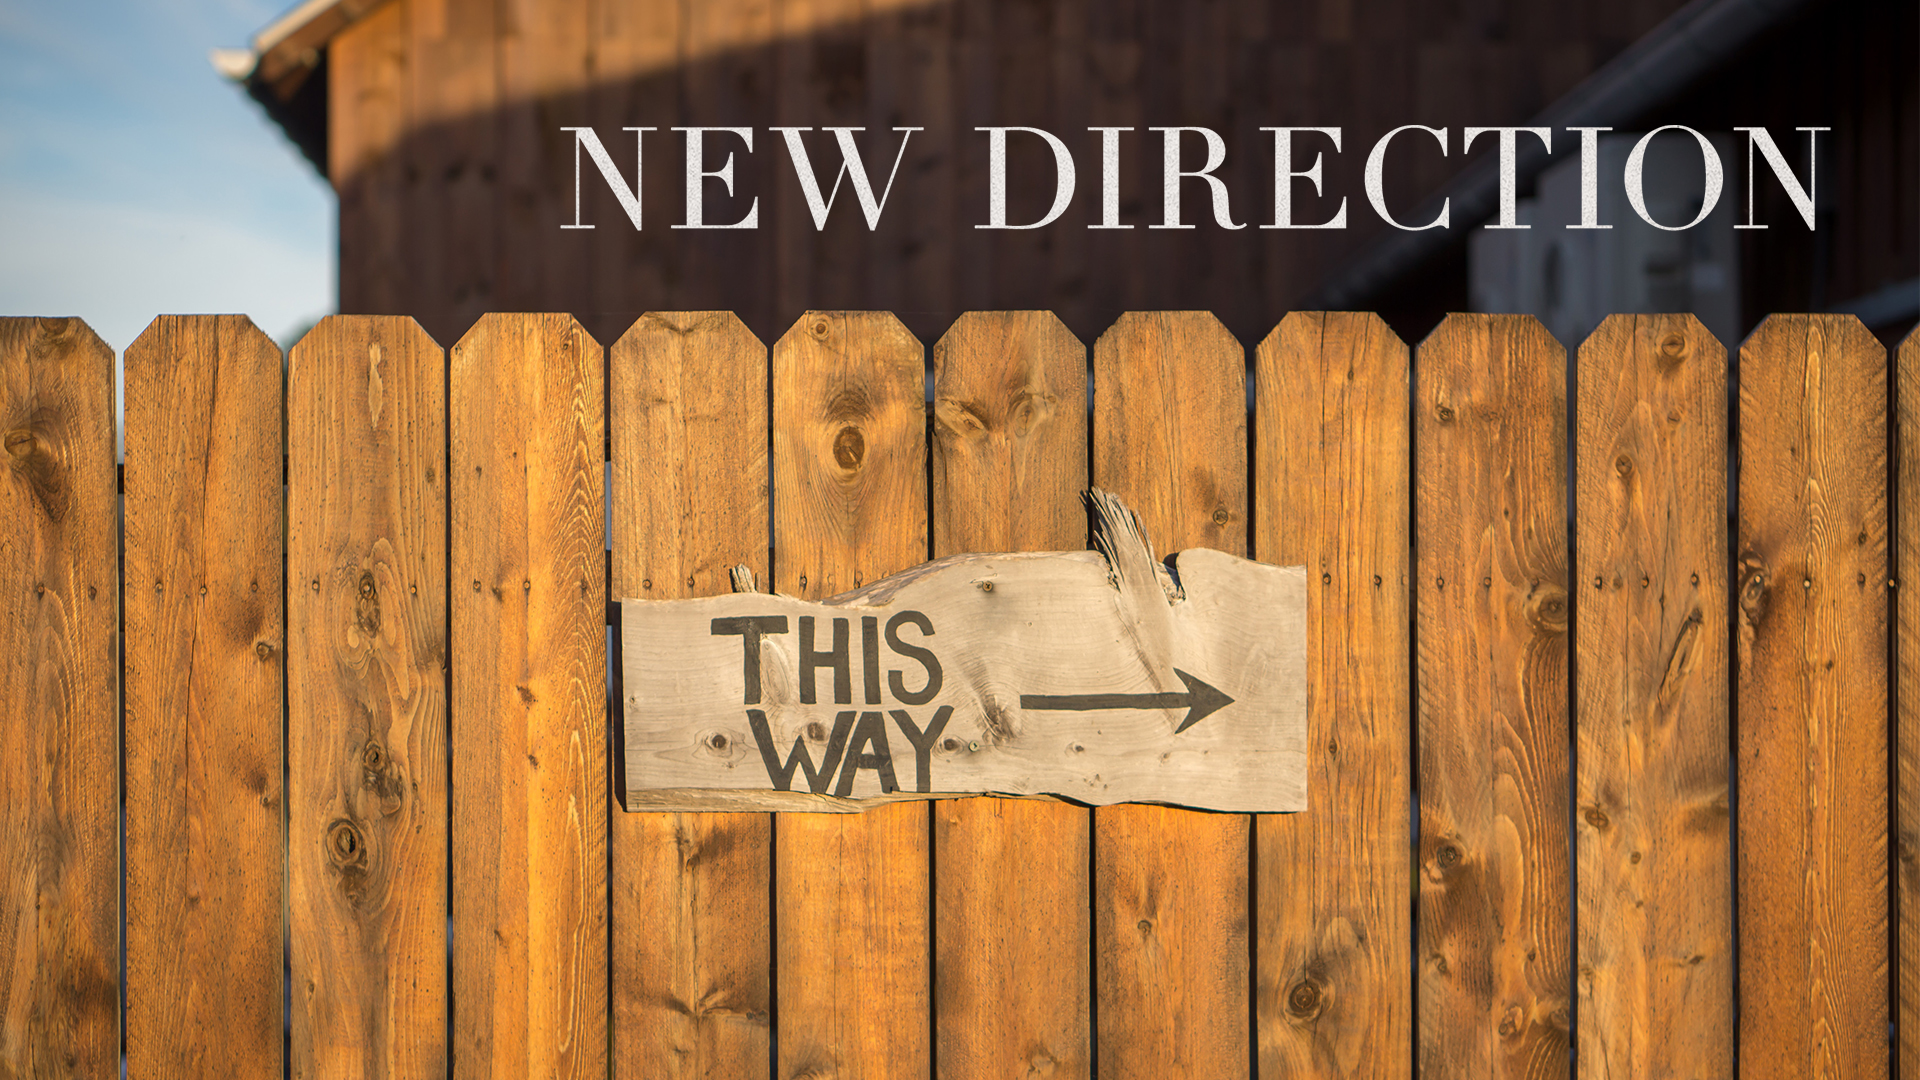 New Direction - 9:30am